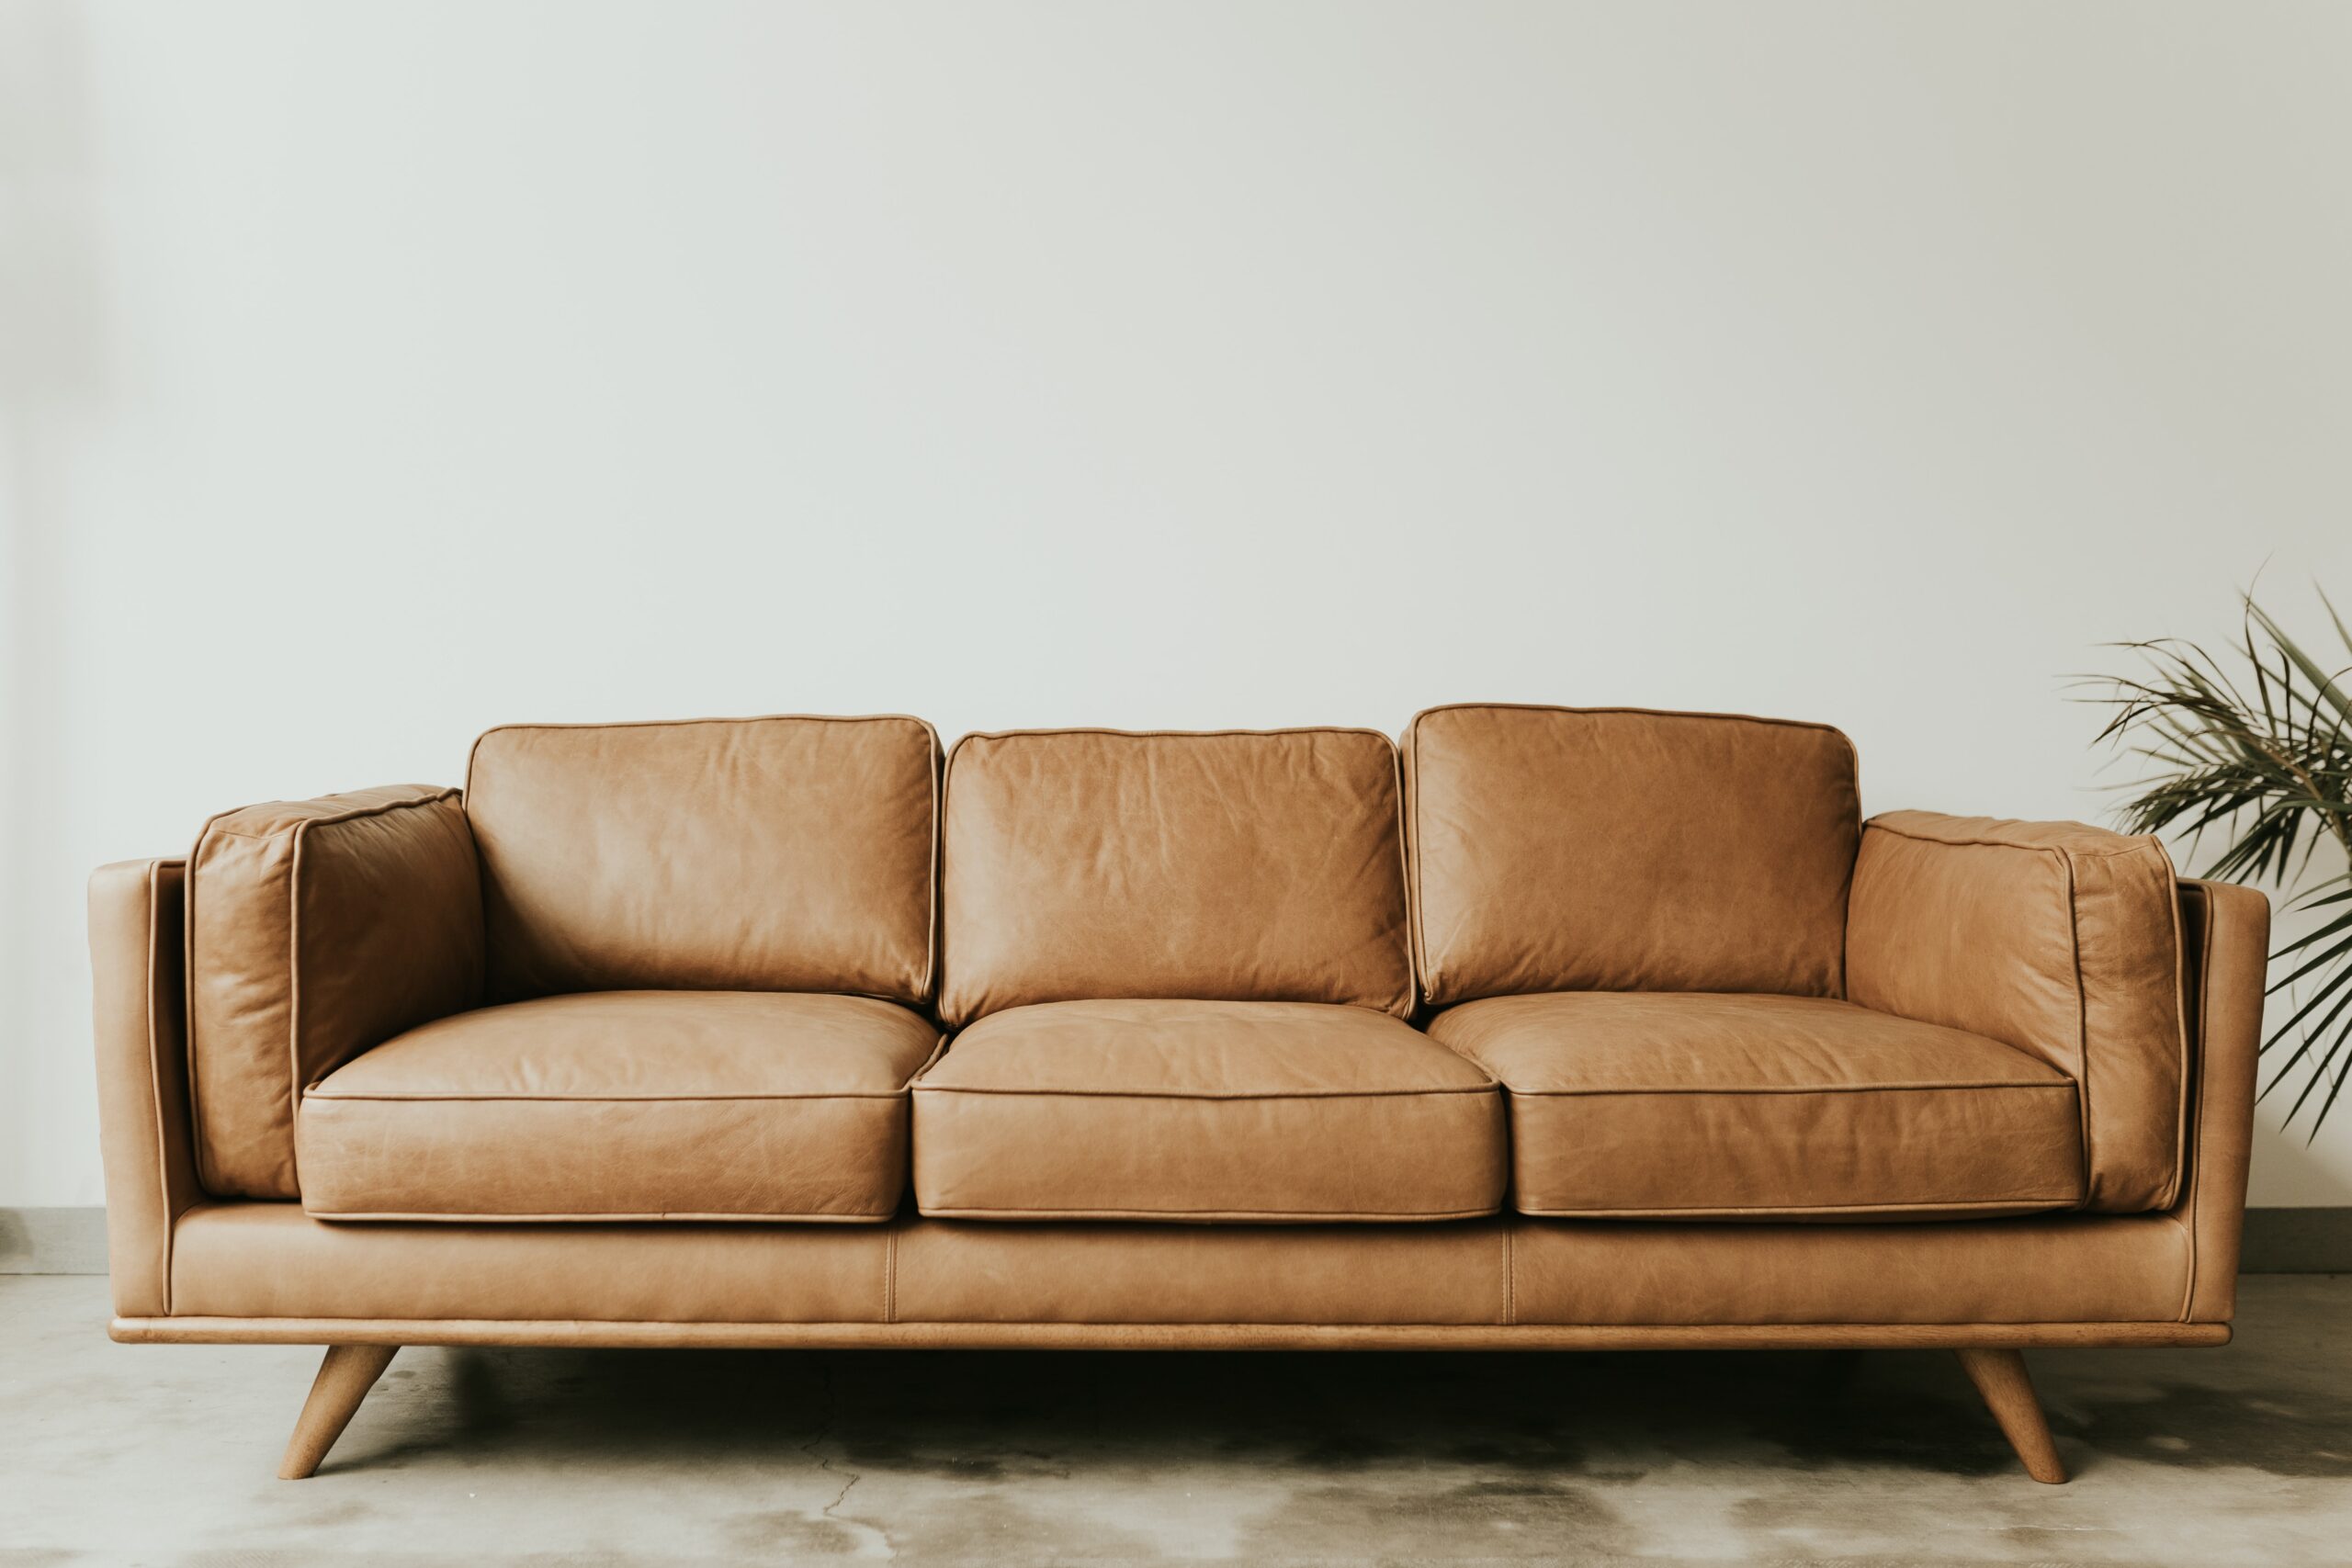 Does your couch smell? If so, a professional upholstery cleaning can get it smelling as good as new again.